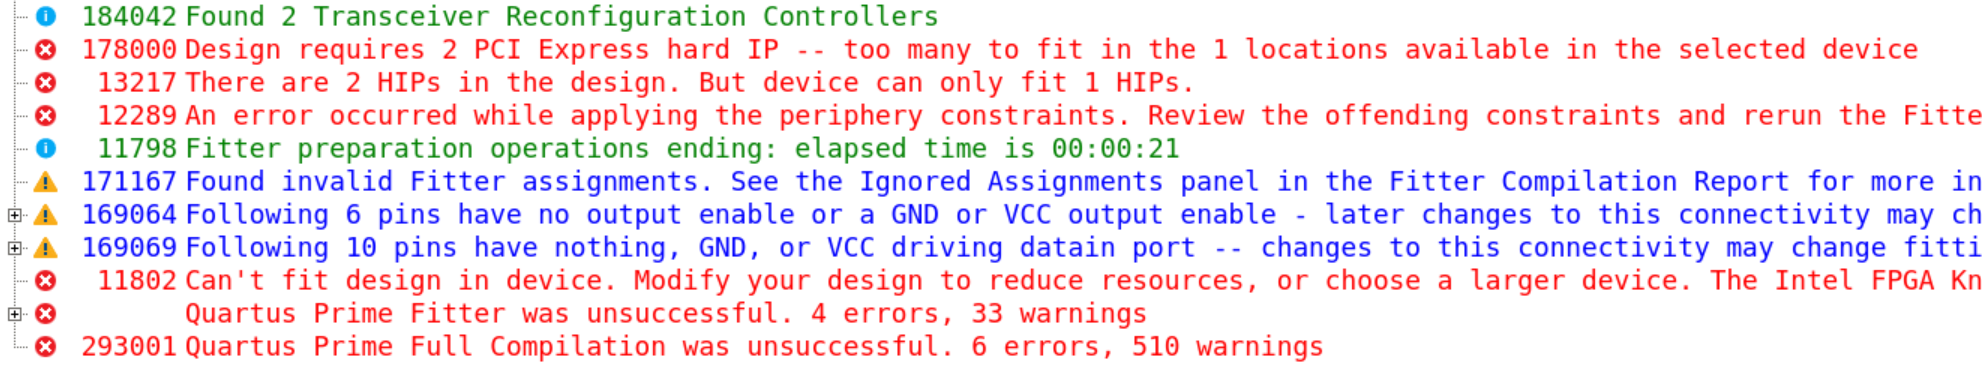 Error message when two hard IPs are instantiated with a normal part